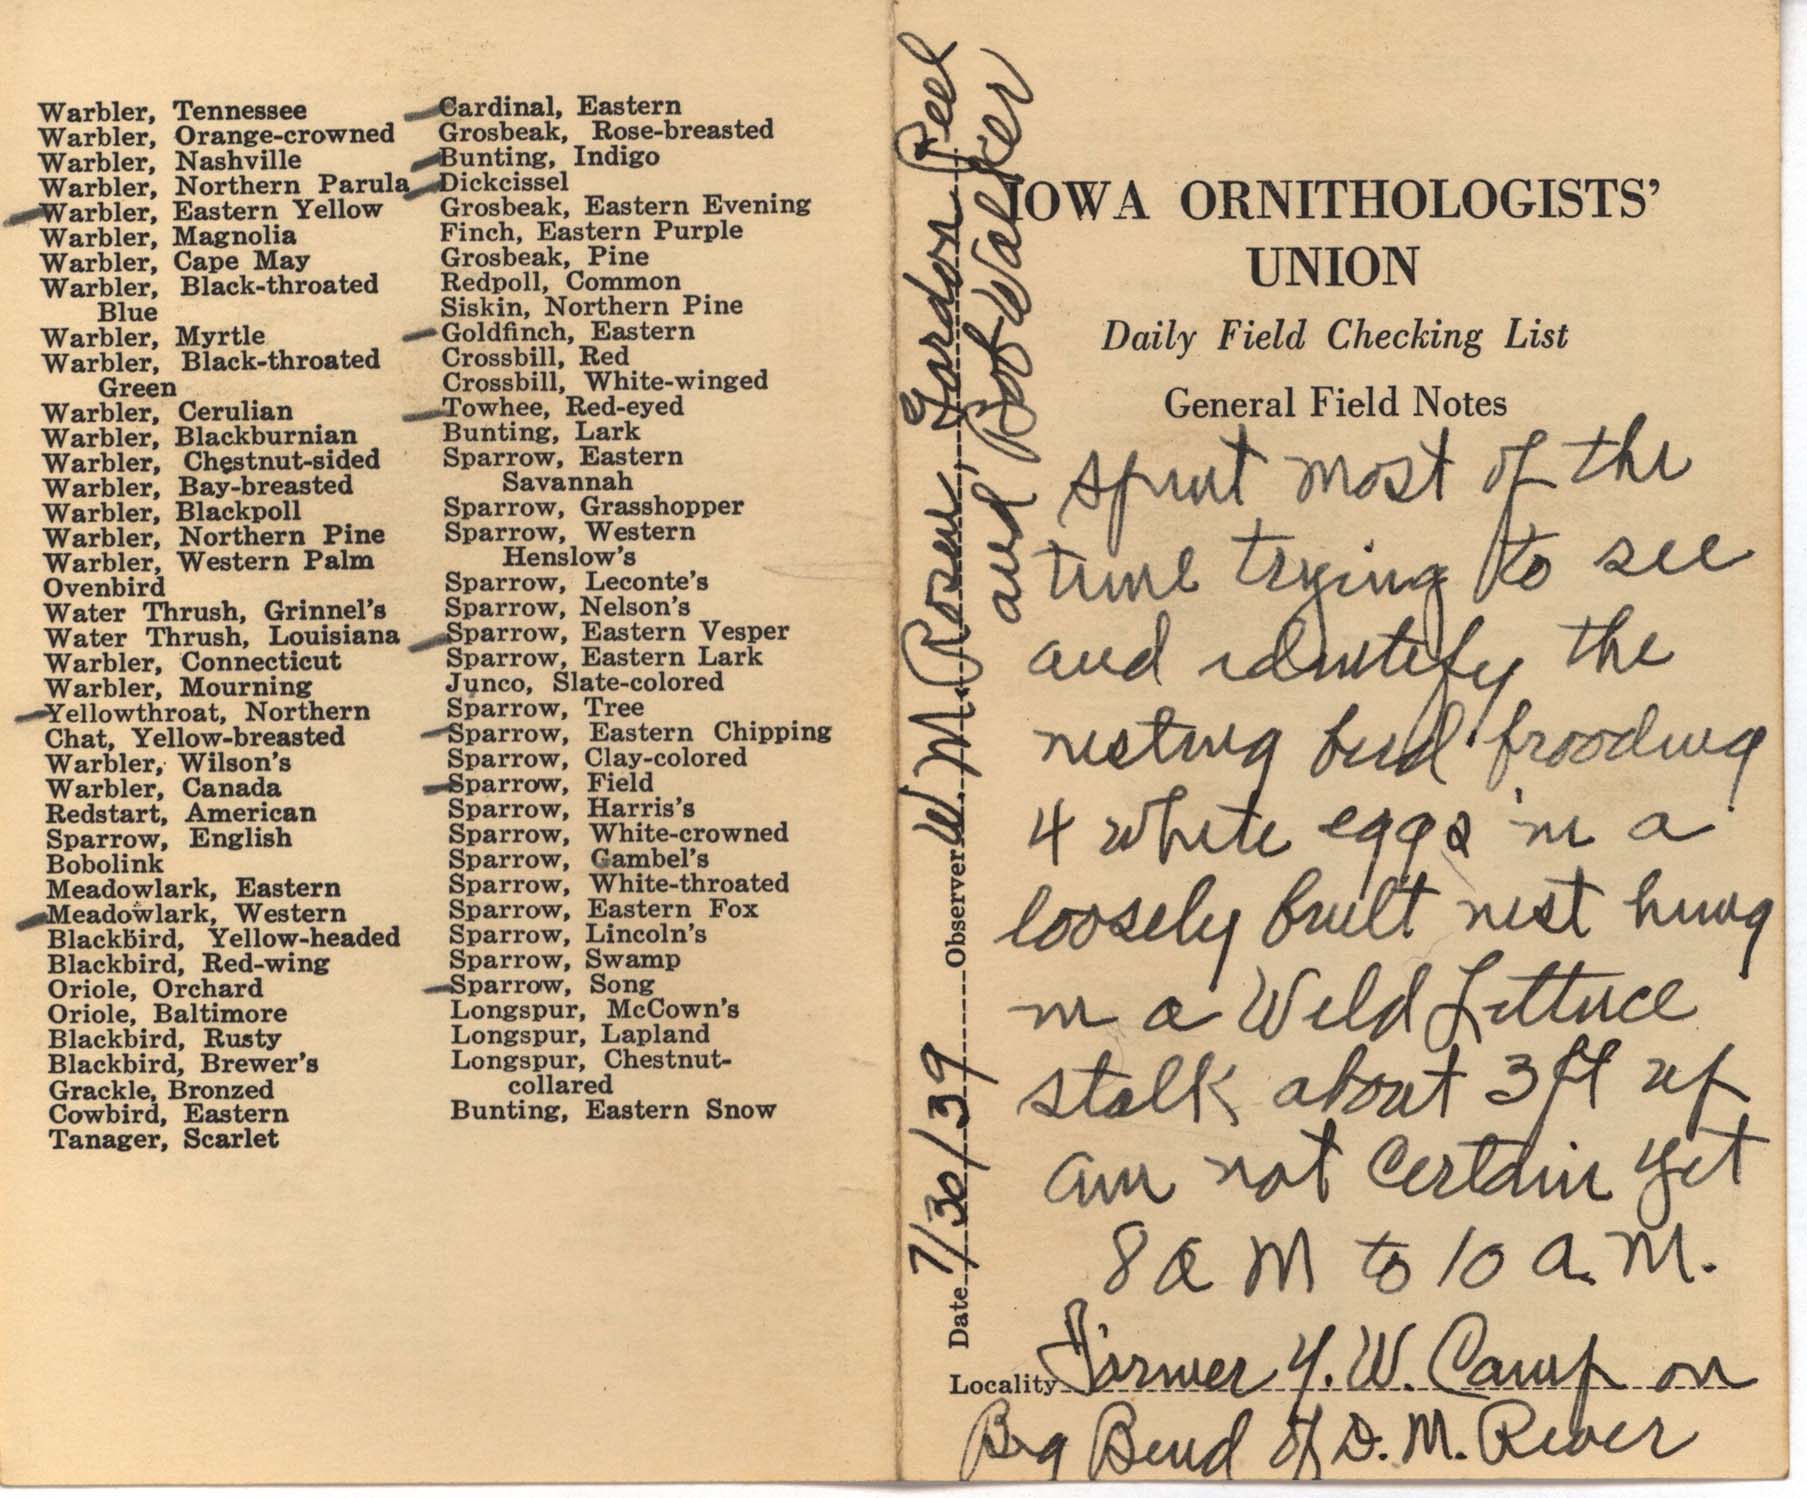 Daily field checking list by Walter Rosene, July 30, 1939